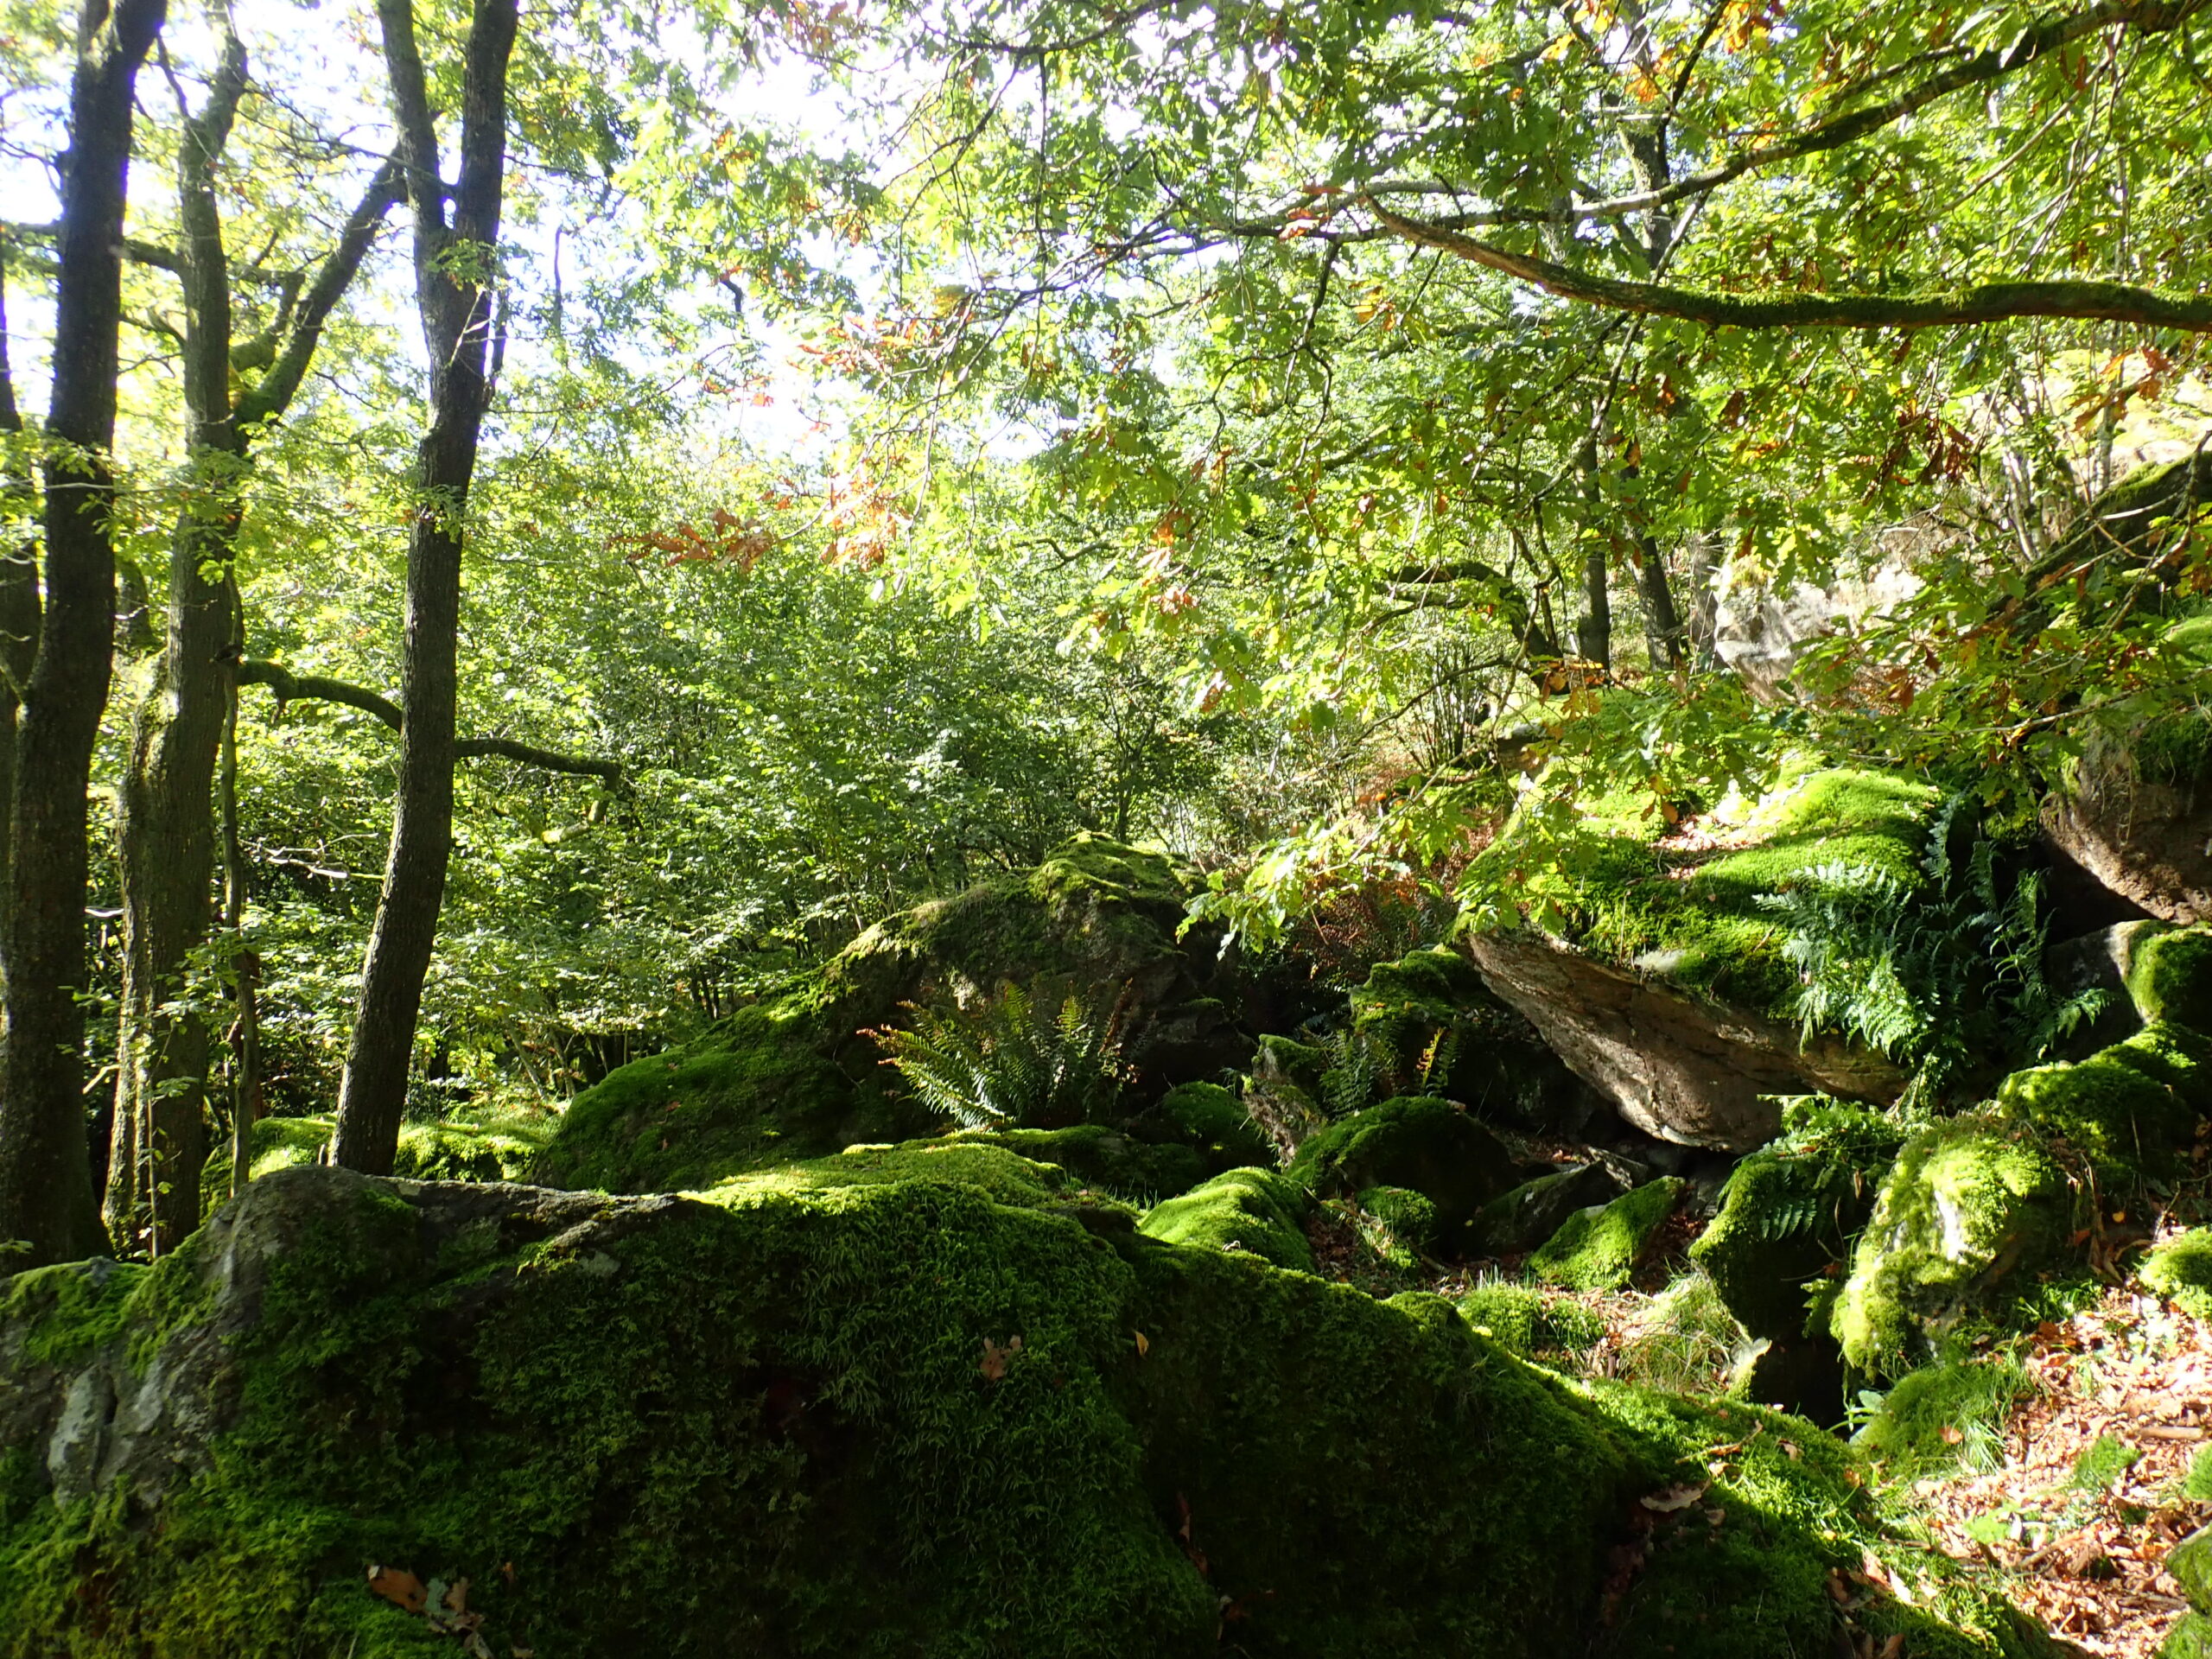 Bryophyte-covered boulders in Wallowbarrow Coppice (KM)